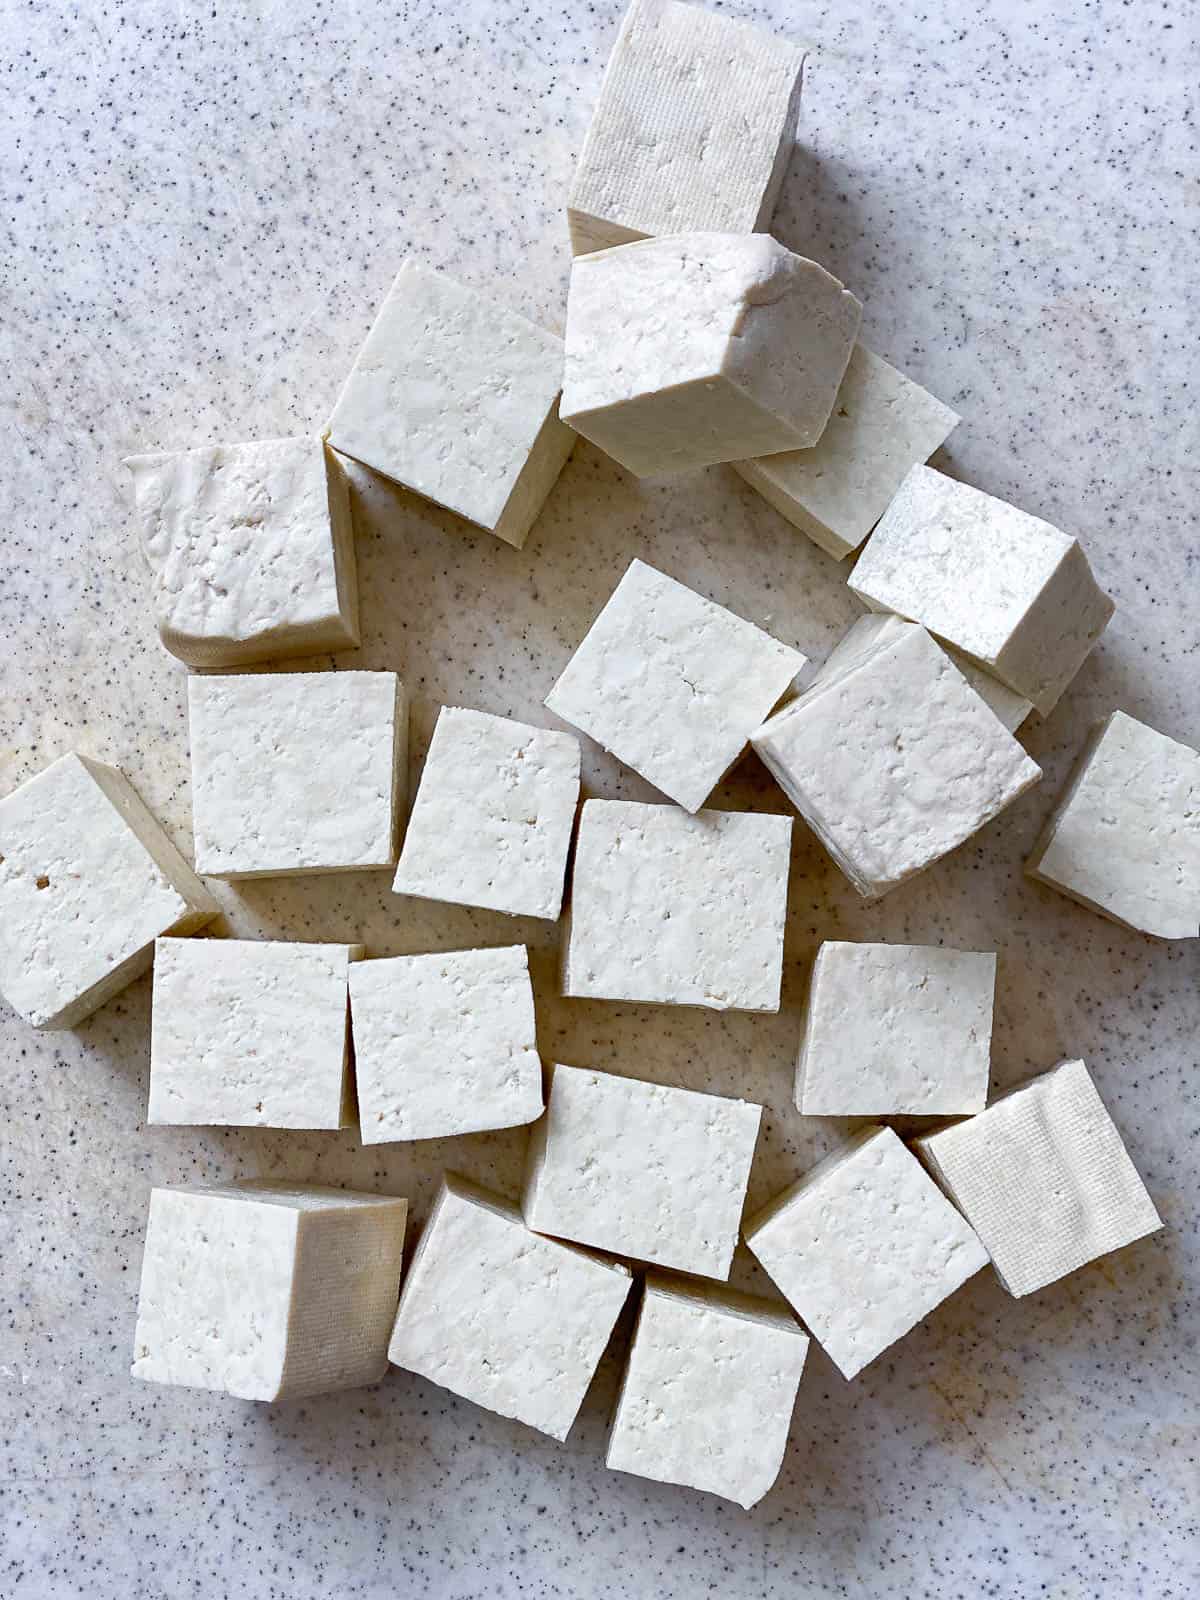 Cut up tofu into bite-sized 1-inch cubes.